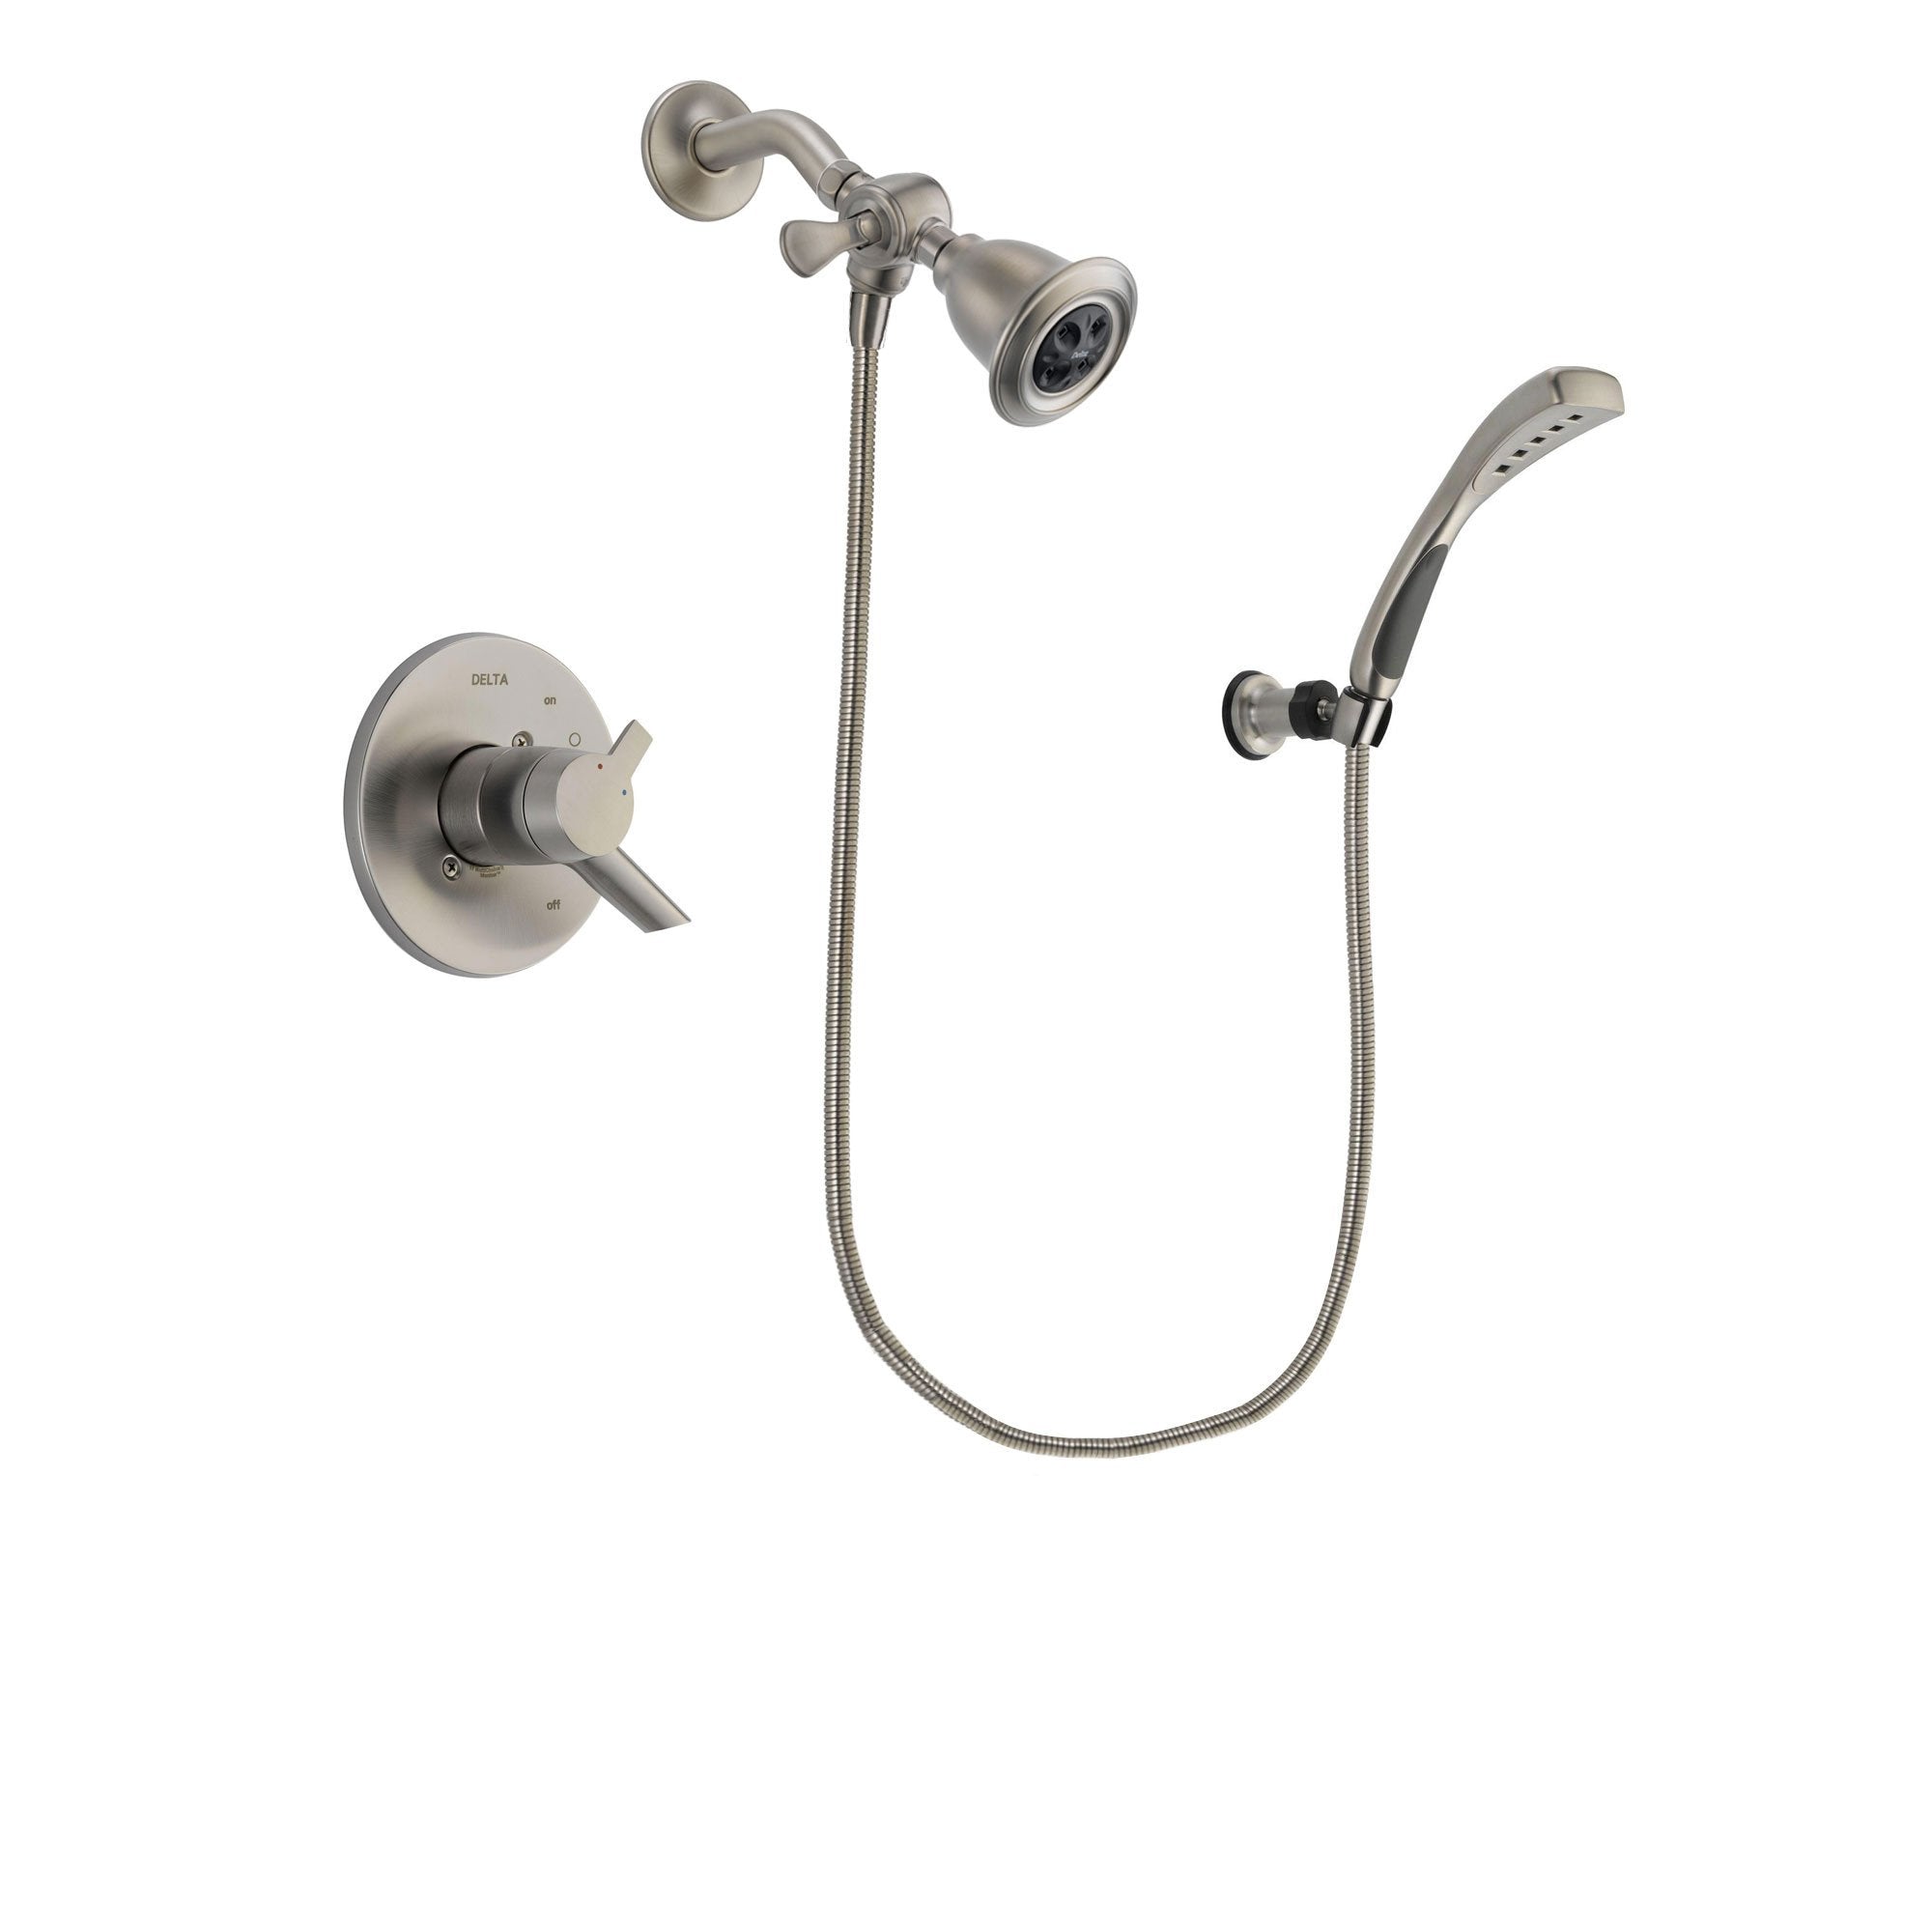 Delta Compel Stainless Steel Finish Dual Control Shower Faucet System Package with Water Efficient Showerhead and Wall Mounted Handshower Includes Rough-in Valve DSP1844V